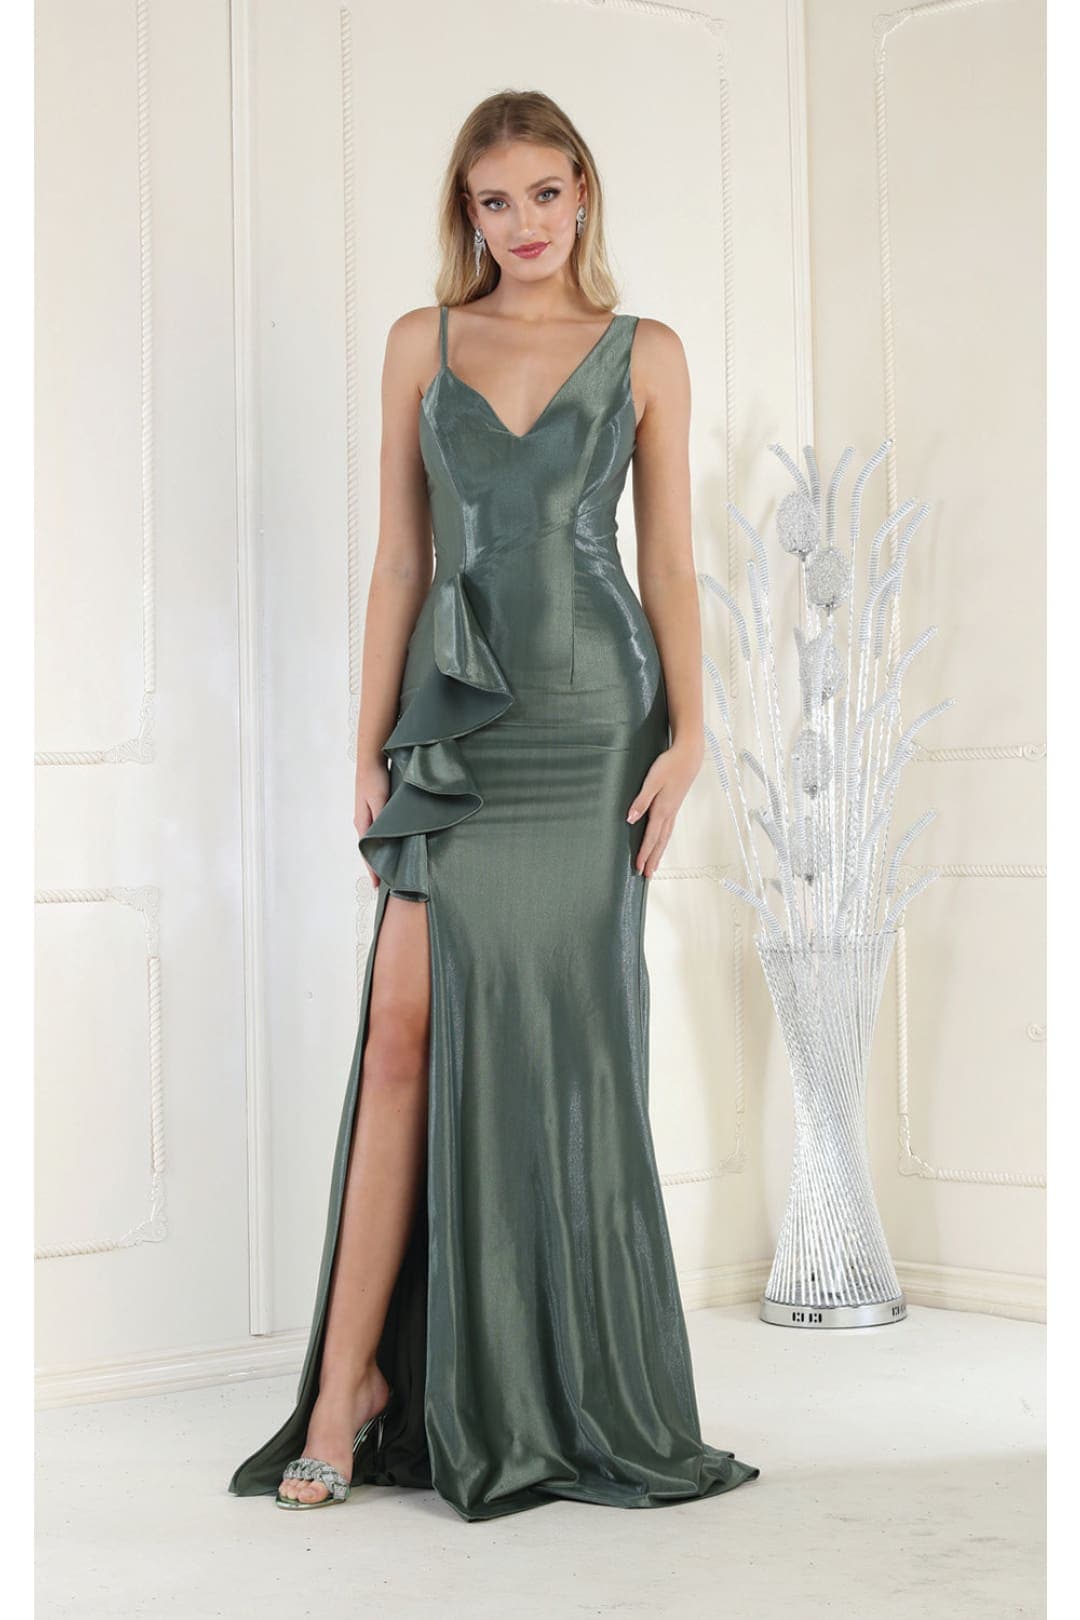 May Queen MQ1932 Ruffled Mermaid Formal Gown - OLIVE / 4 - Dress